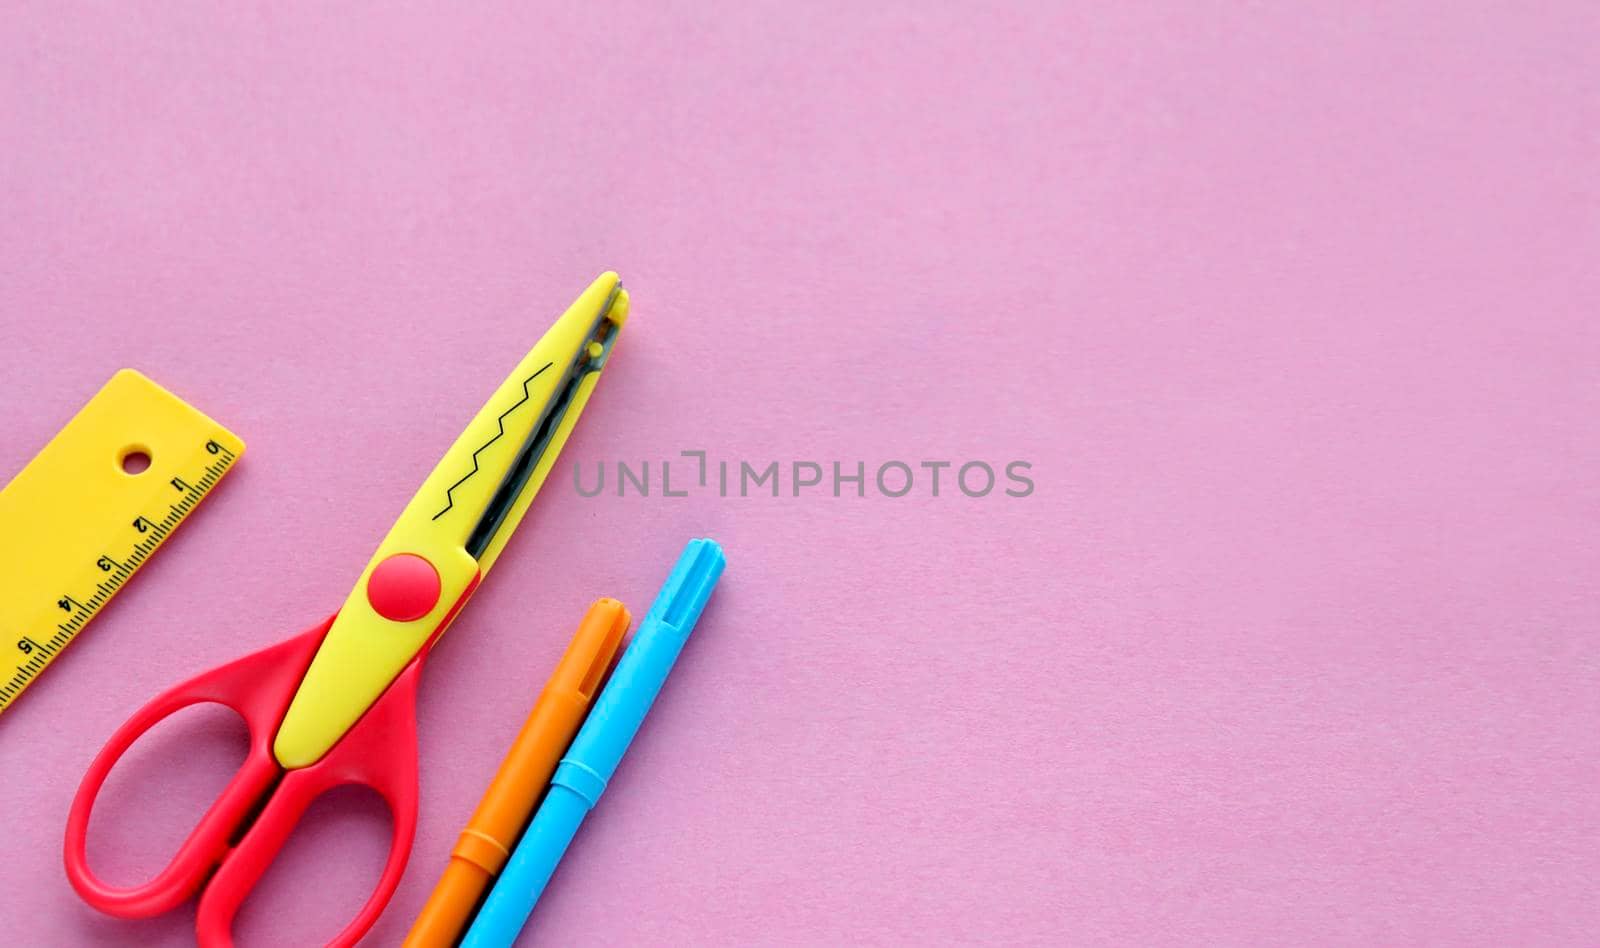 scissors, ruler and crayons on a pink background. Creative, fashionable, minimalistic, school or office workspace with supplies on cyan background. Flat lay.